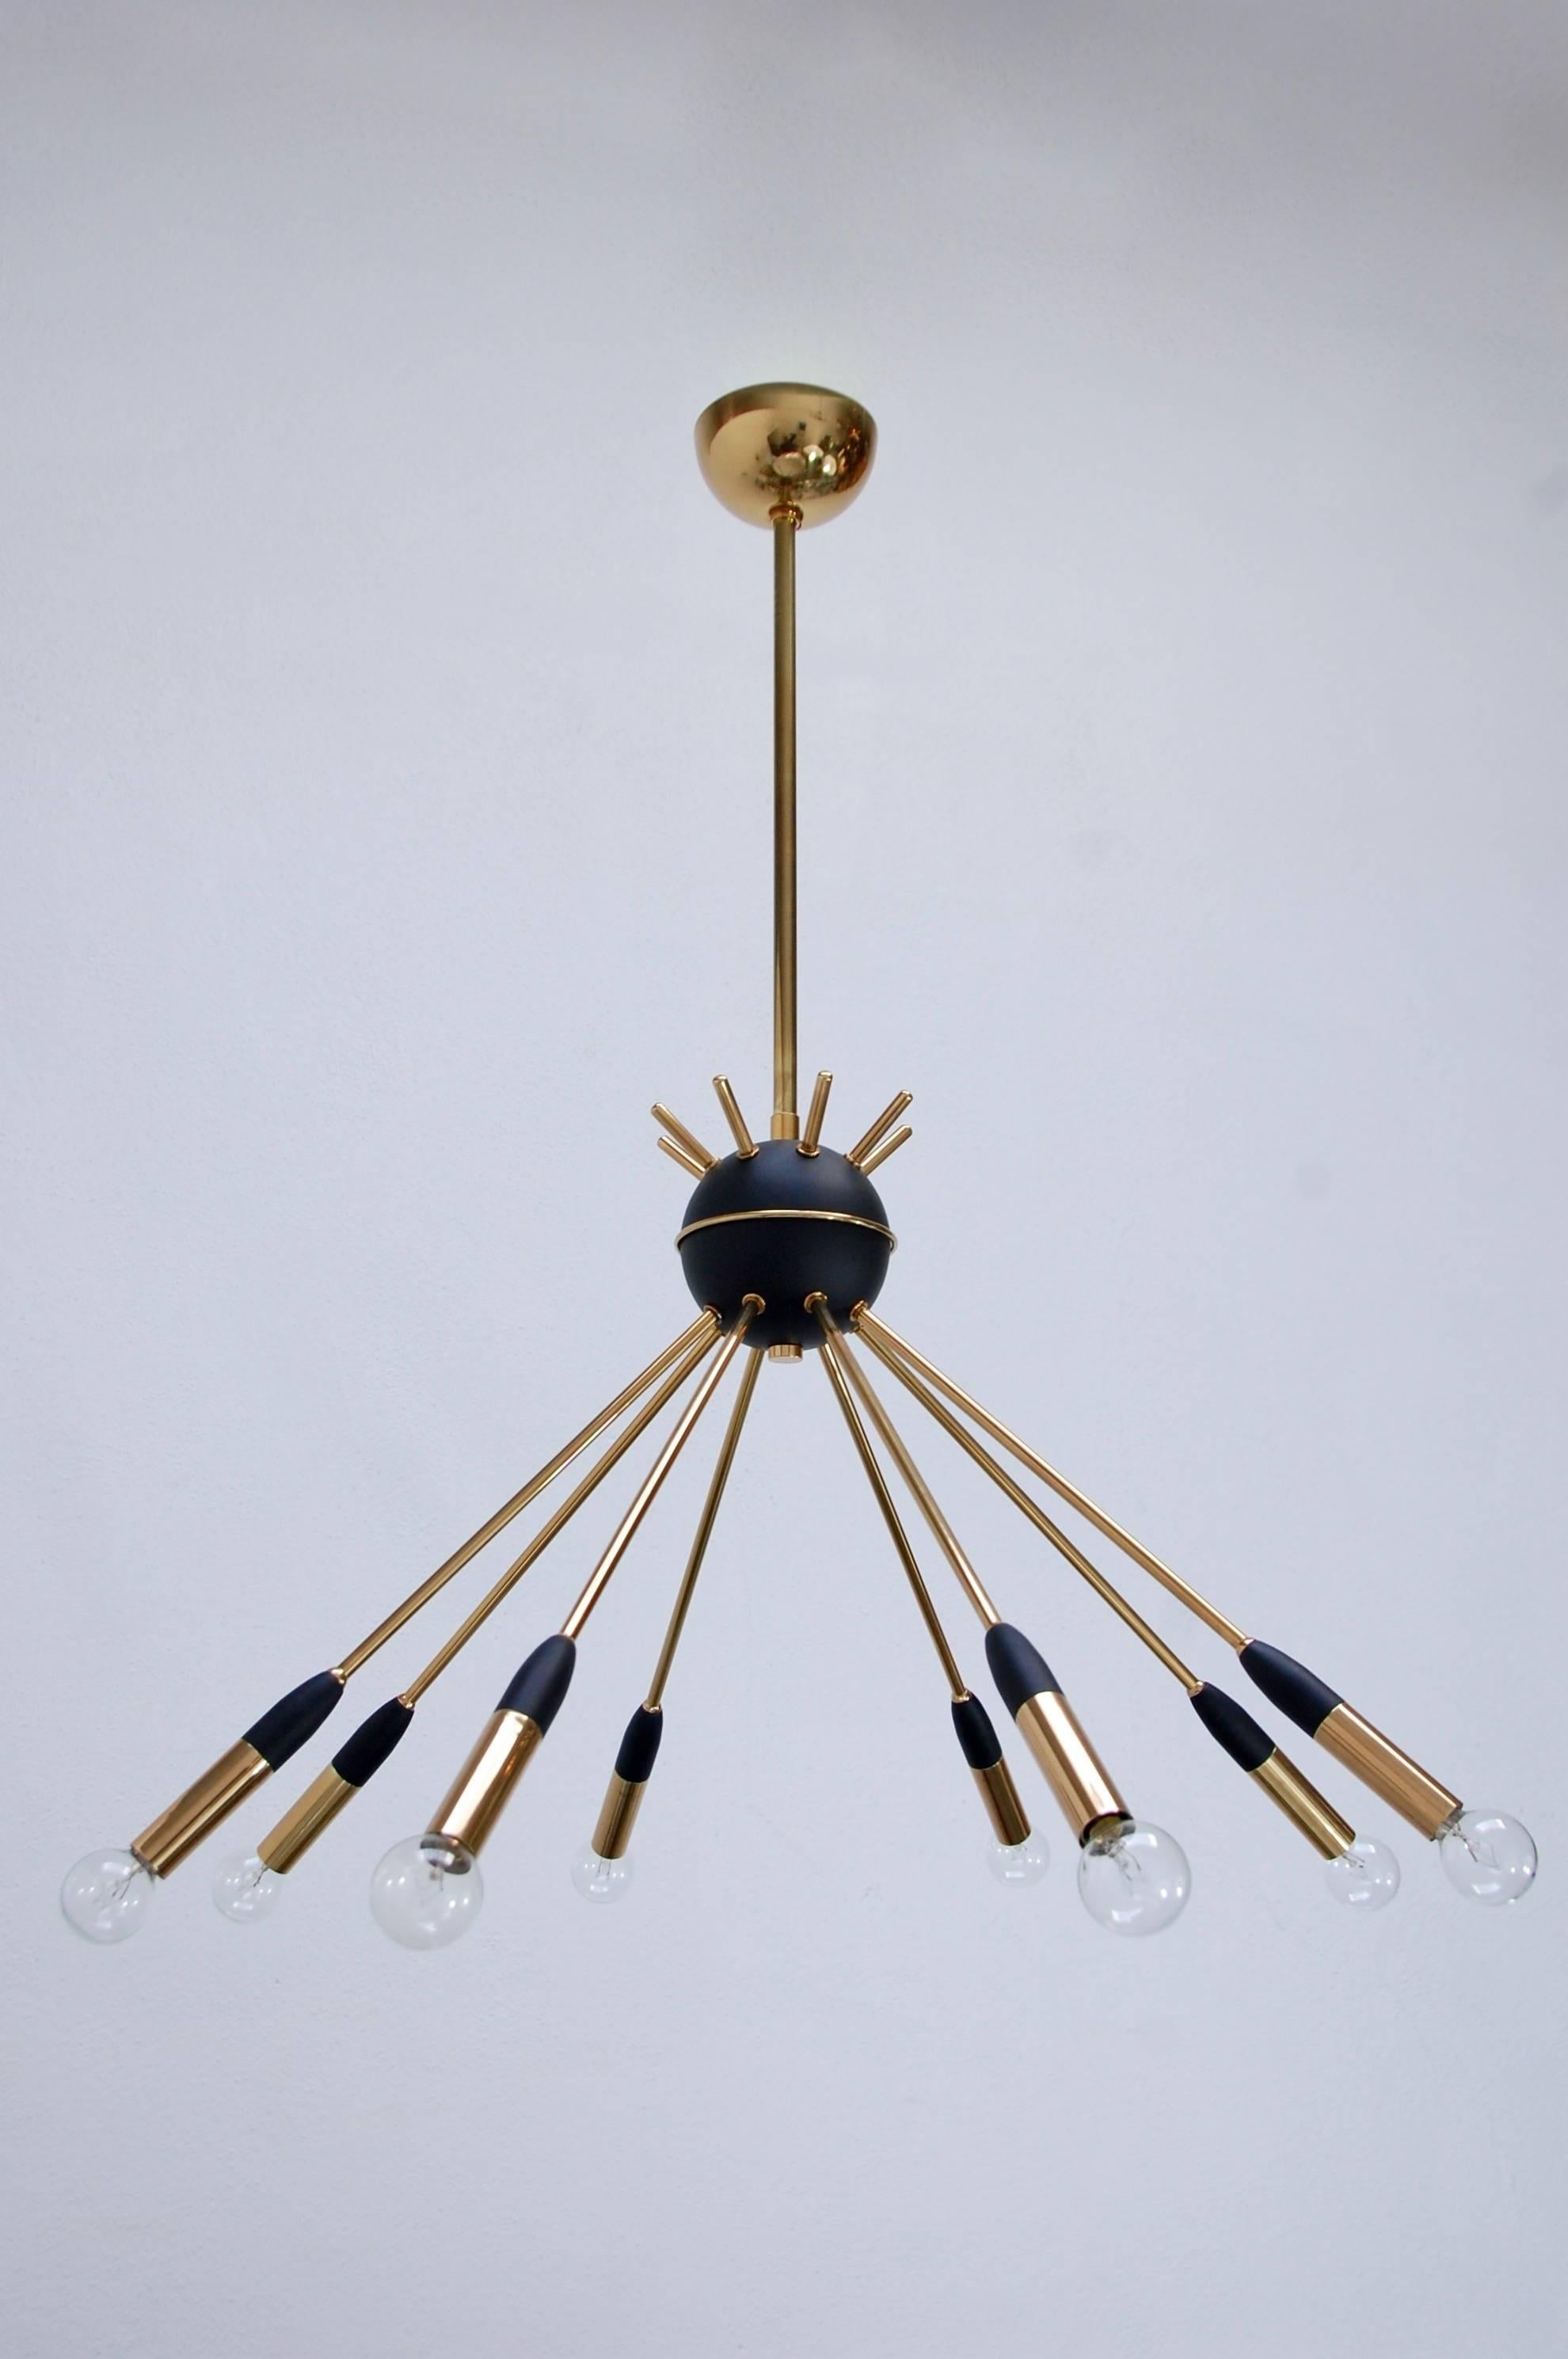 Of the period Italian sputnik chandelier from the 1950s. Fully restored with (8) single E12 candelabra based socket per arm, wired for the US. Overall drop adjustable upon request.
We at Lumfardo Luminaires do all the restorations of our vintage